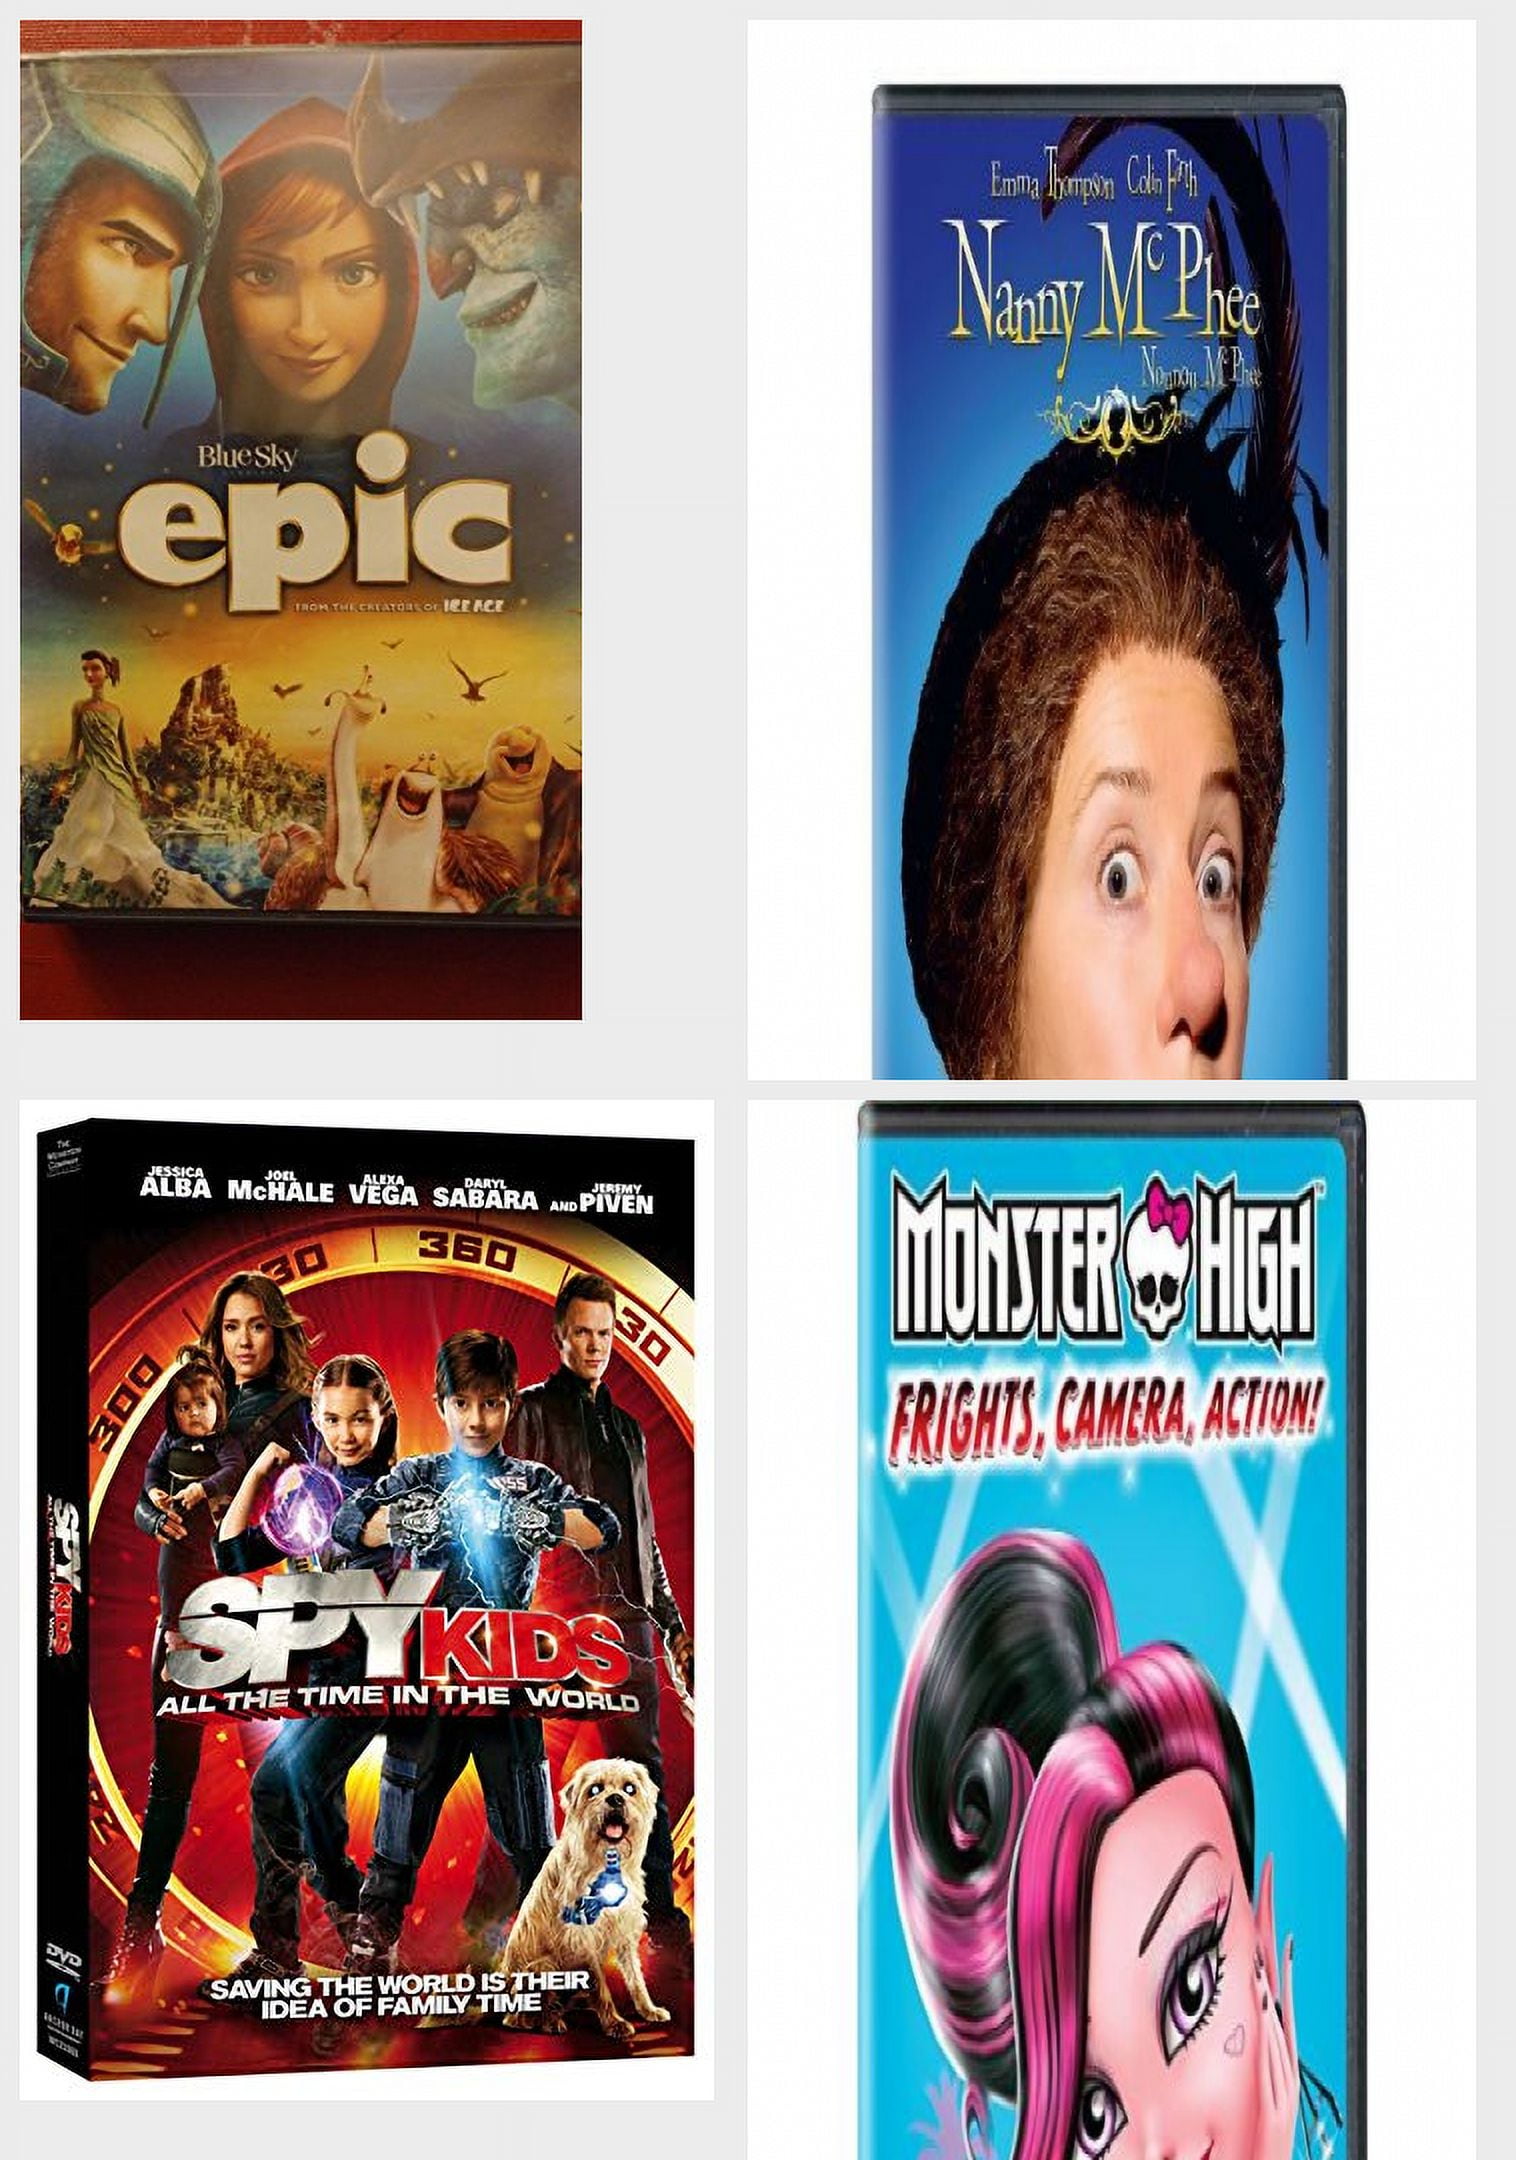 Children's 4 Pack DVD Bundle: Epic, Nanny McPhee, Spy Kids 4: All The Time  In The World, Monster High: Frights, Camera, Action!